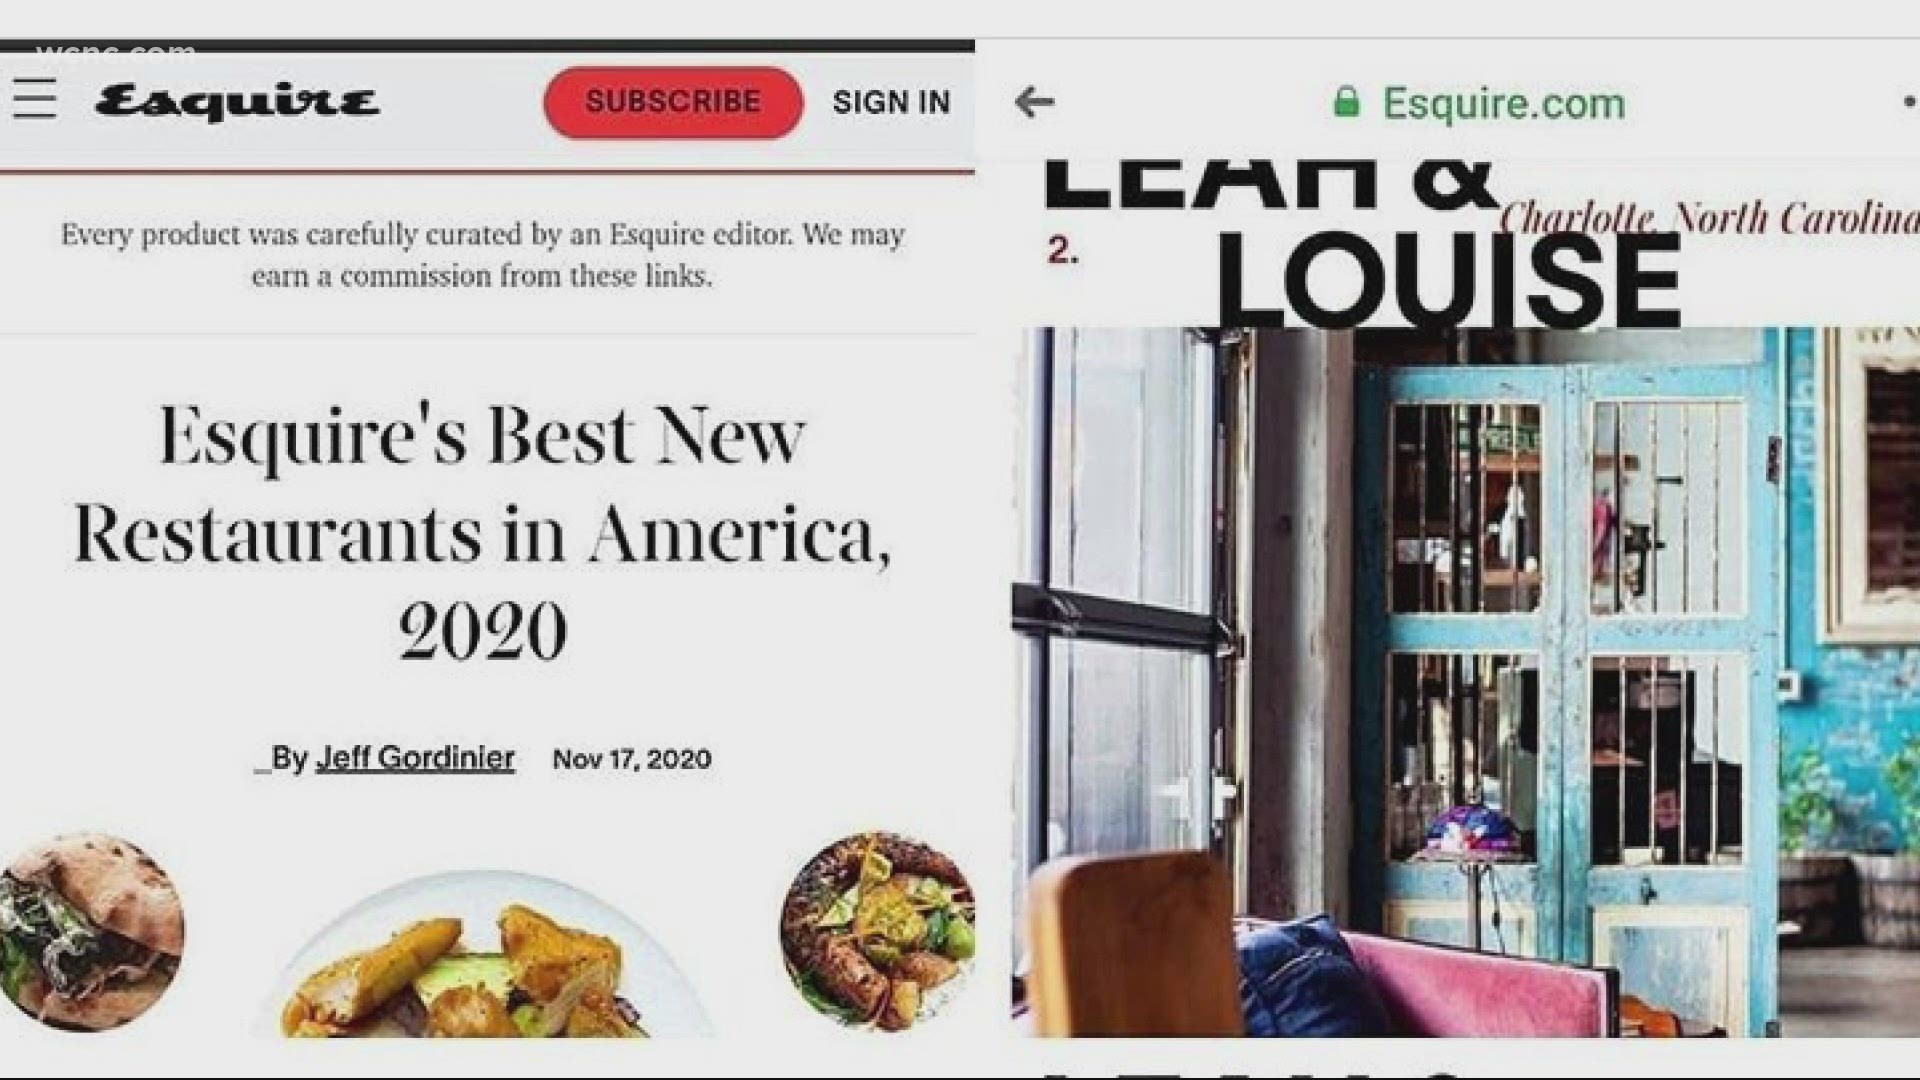 The magazine named Leah and Louise as No. 2 out of 23 restaurants featured from across the country.